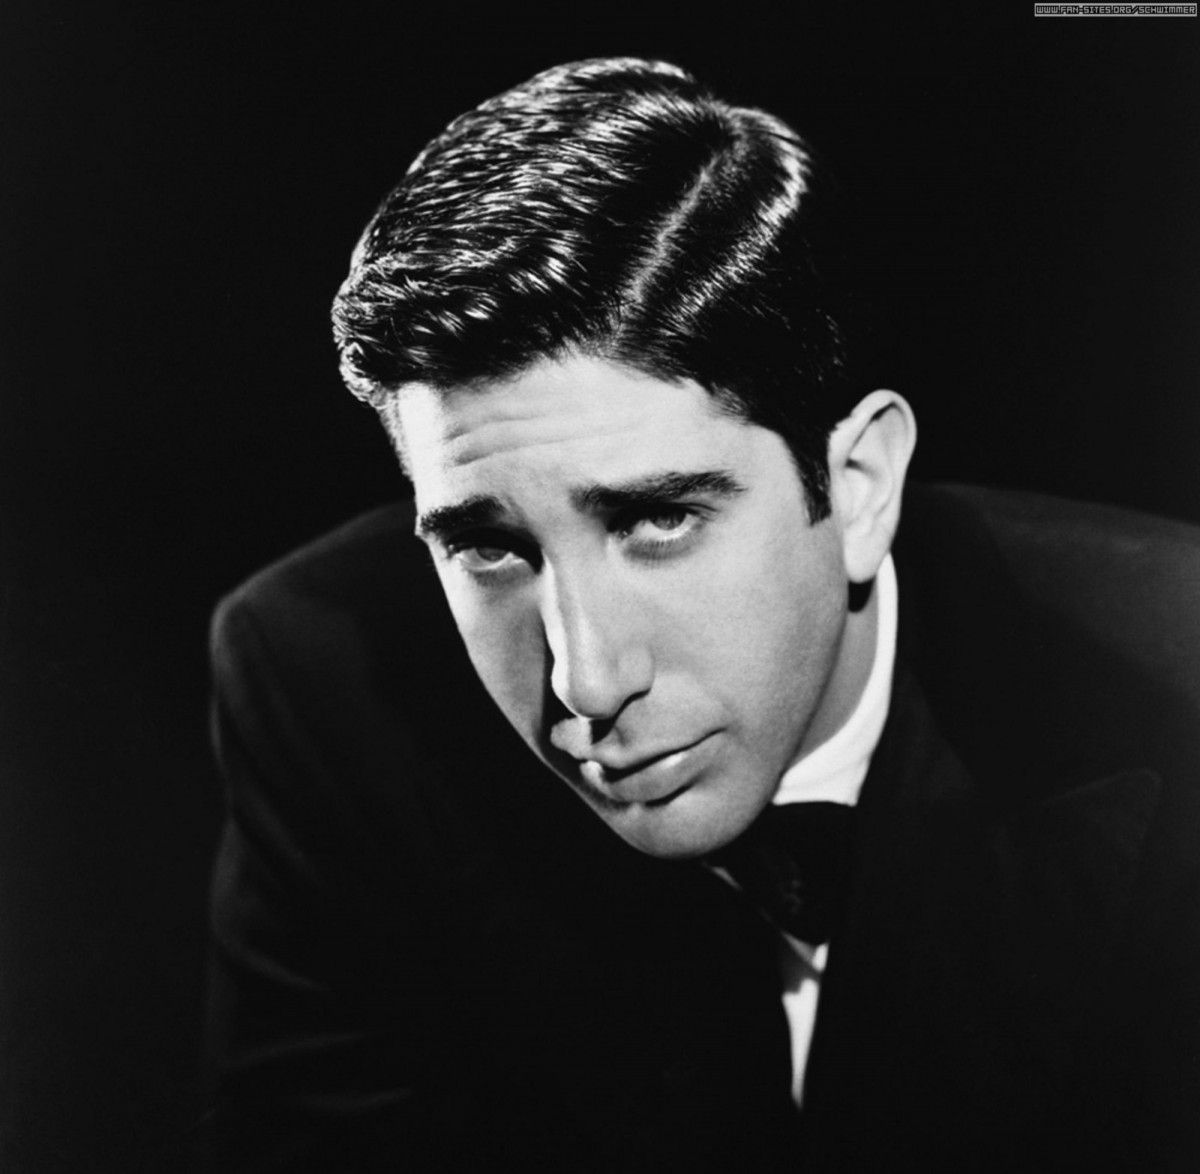 David Schwimmer photo 4 of 23 pics, wallpaper - photo #88350 - ThePlace2